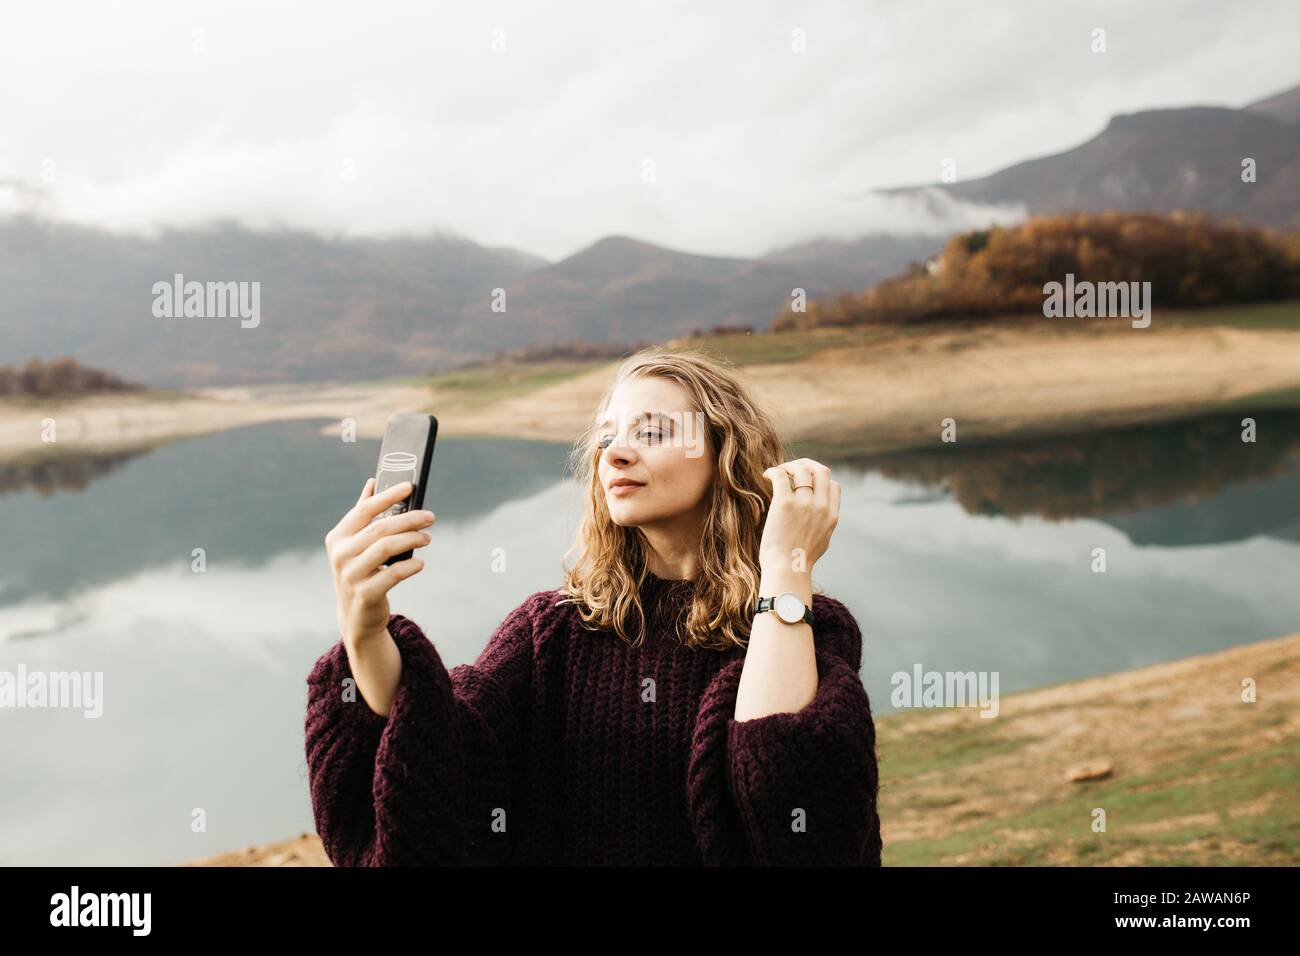 Beautiful woman with curly hair holding mobile phone and taking photos of lake on a cloudy day. She is texting on smartphone and taking selfie. Stock Photo